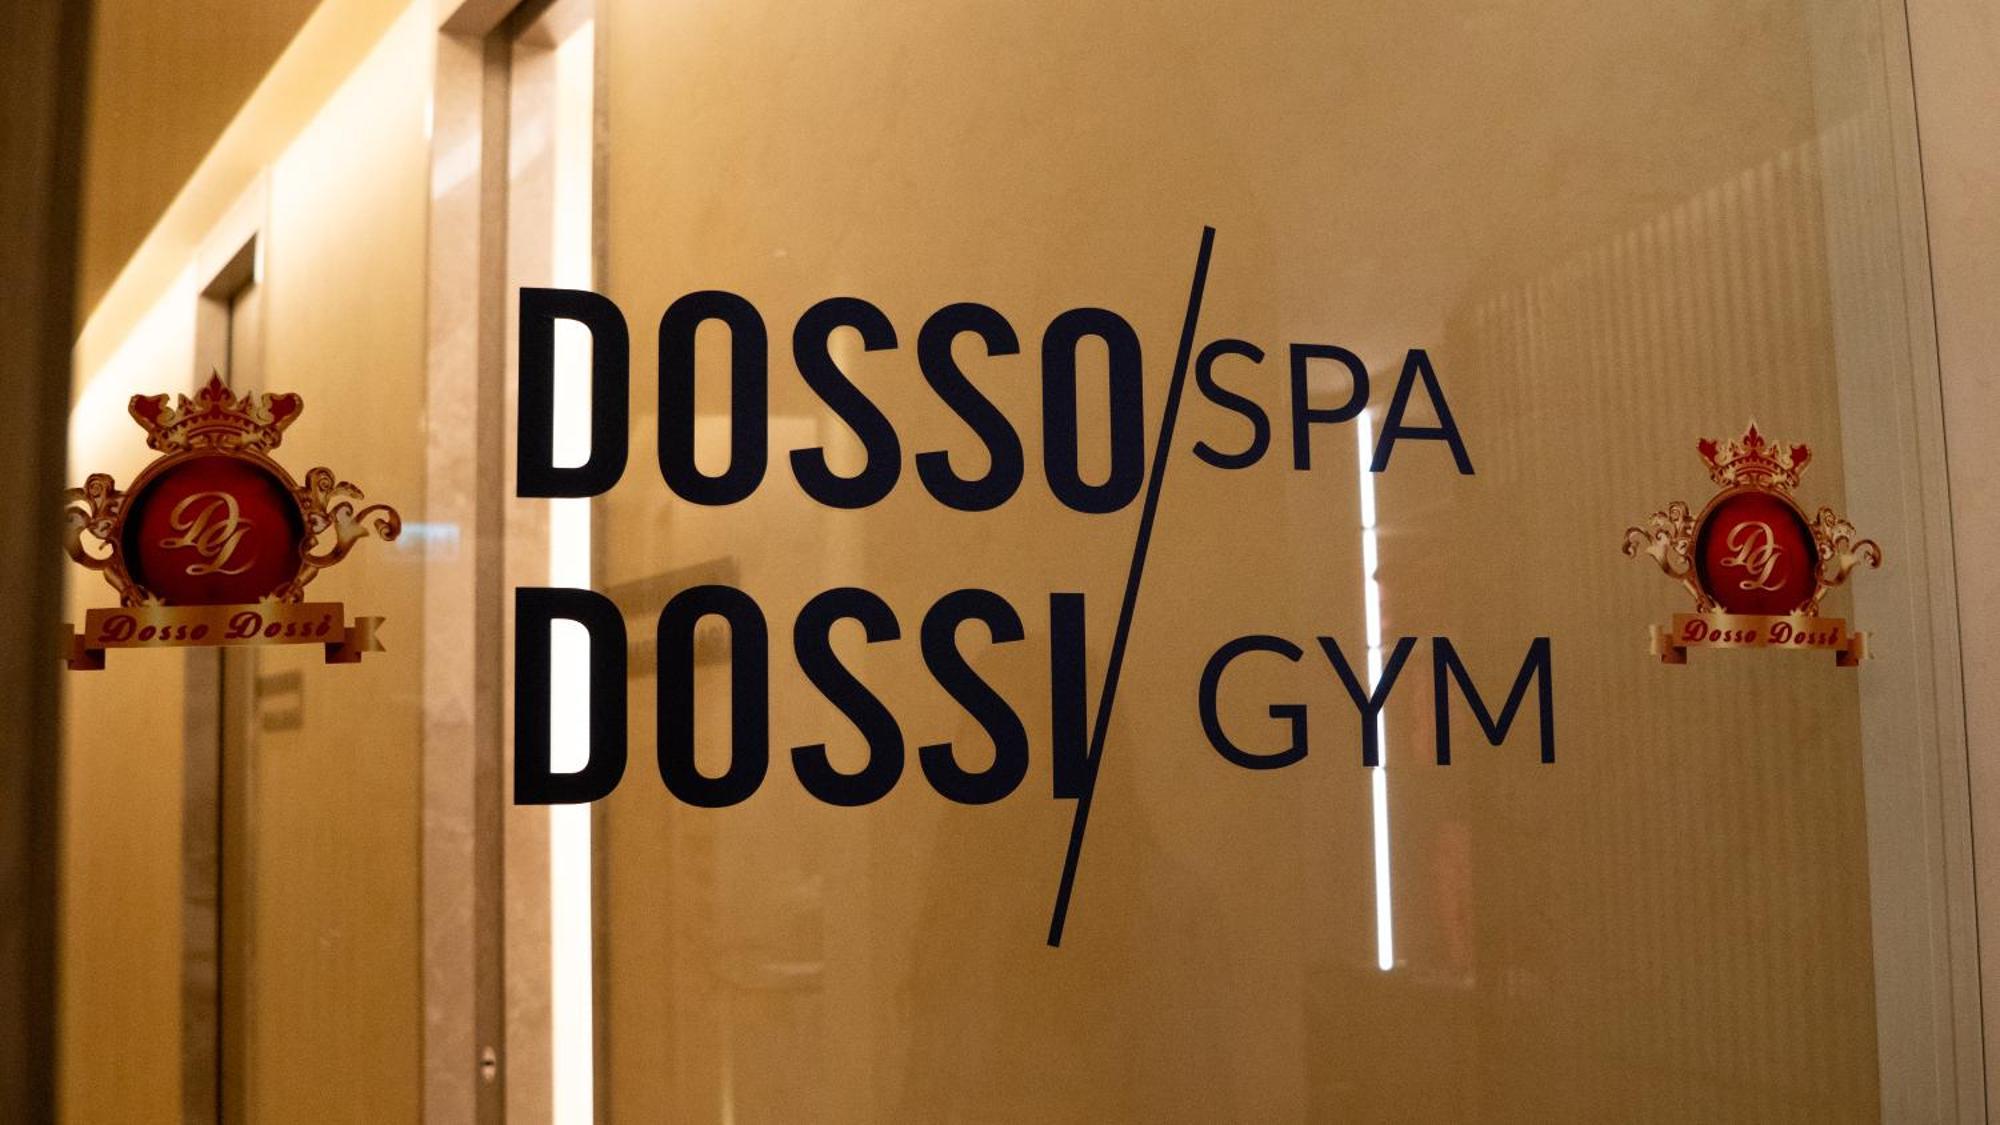 Dosso Dossi Hotels & Spa Golden Horn Istanbul Exterior foto